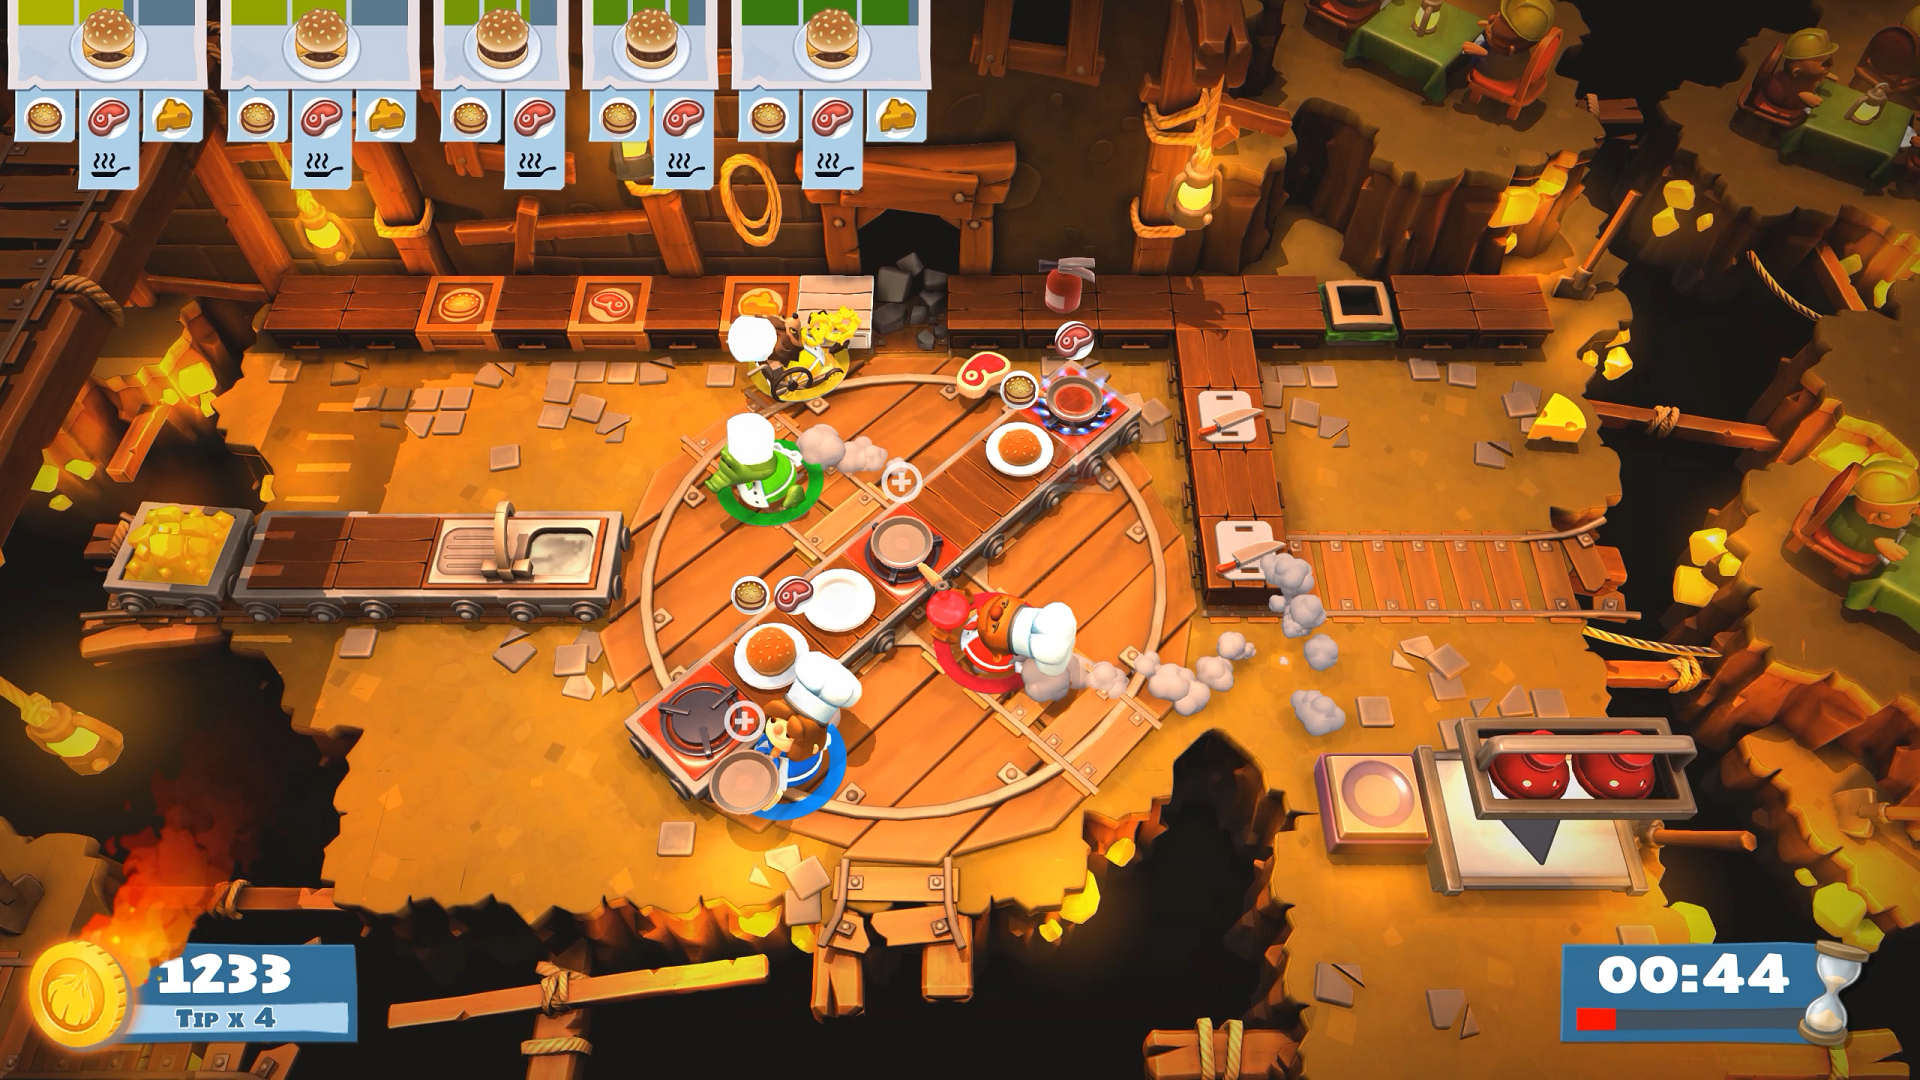 Action, arcade, casual, Family, Ghost Town Games, indie, Overcooked 2, Overcooked 2 Review, party, PS4, PS4 Review, Rating 8/10, Team17 Digital